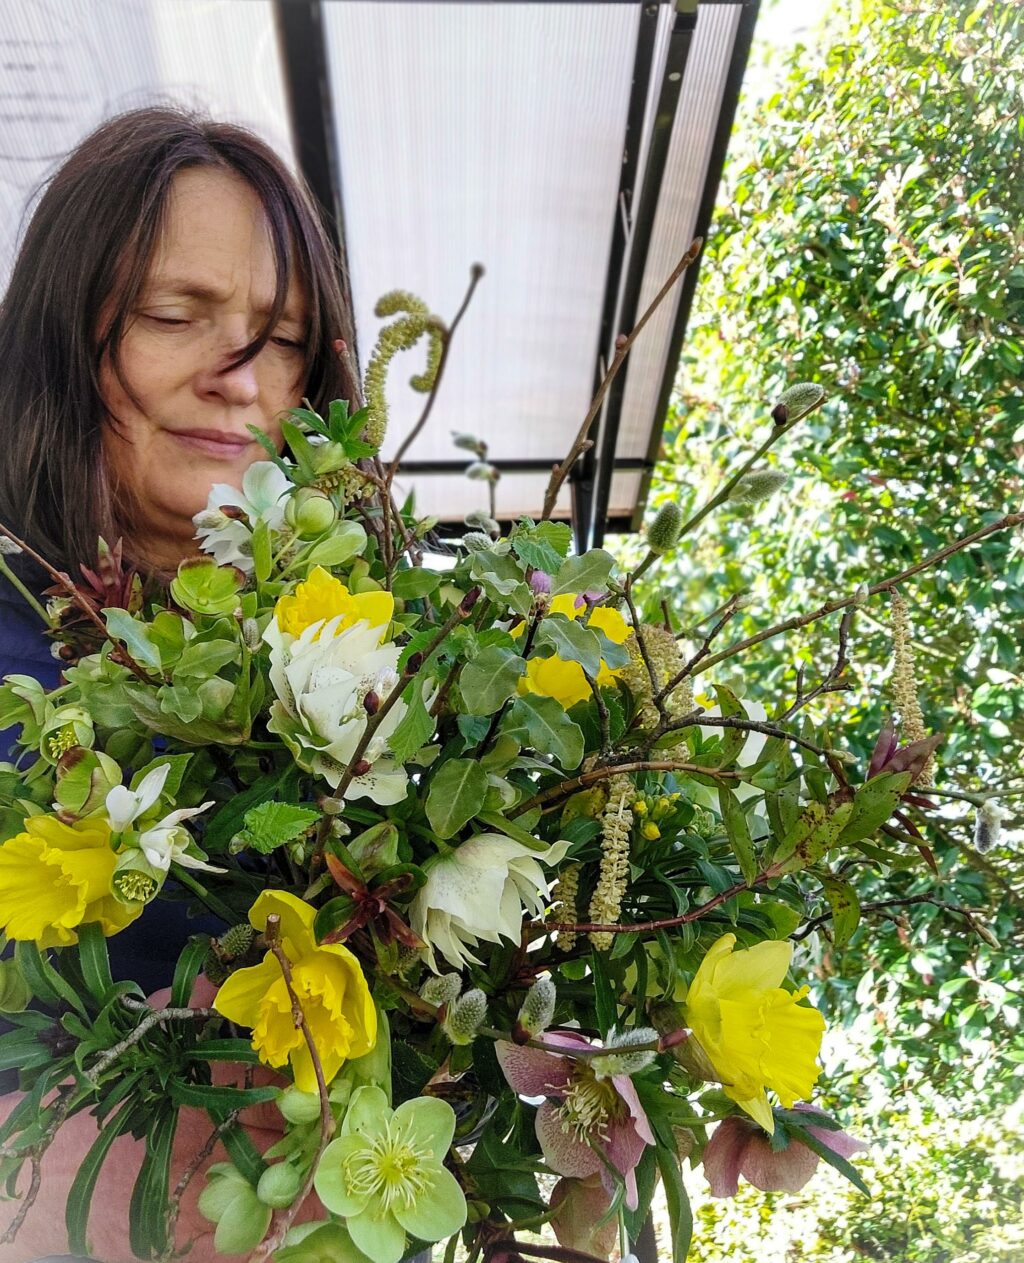 Kathryn Hurst holds a February bouquet made exclusively from season British flowers